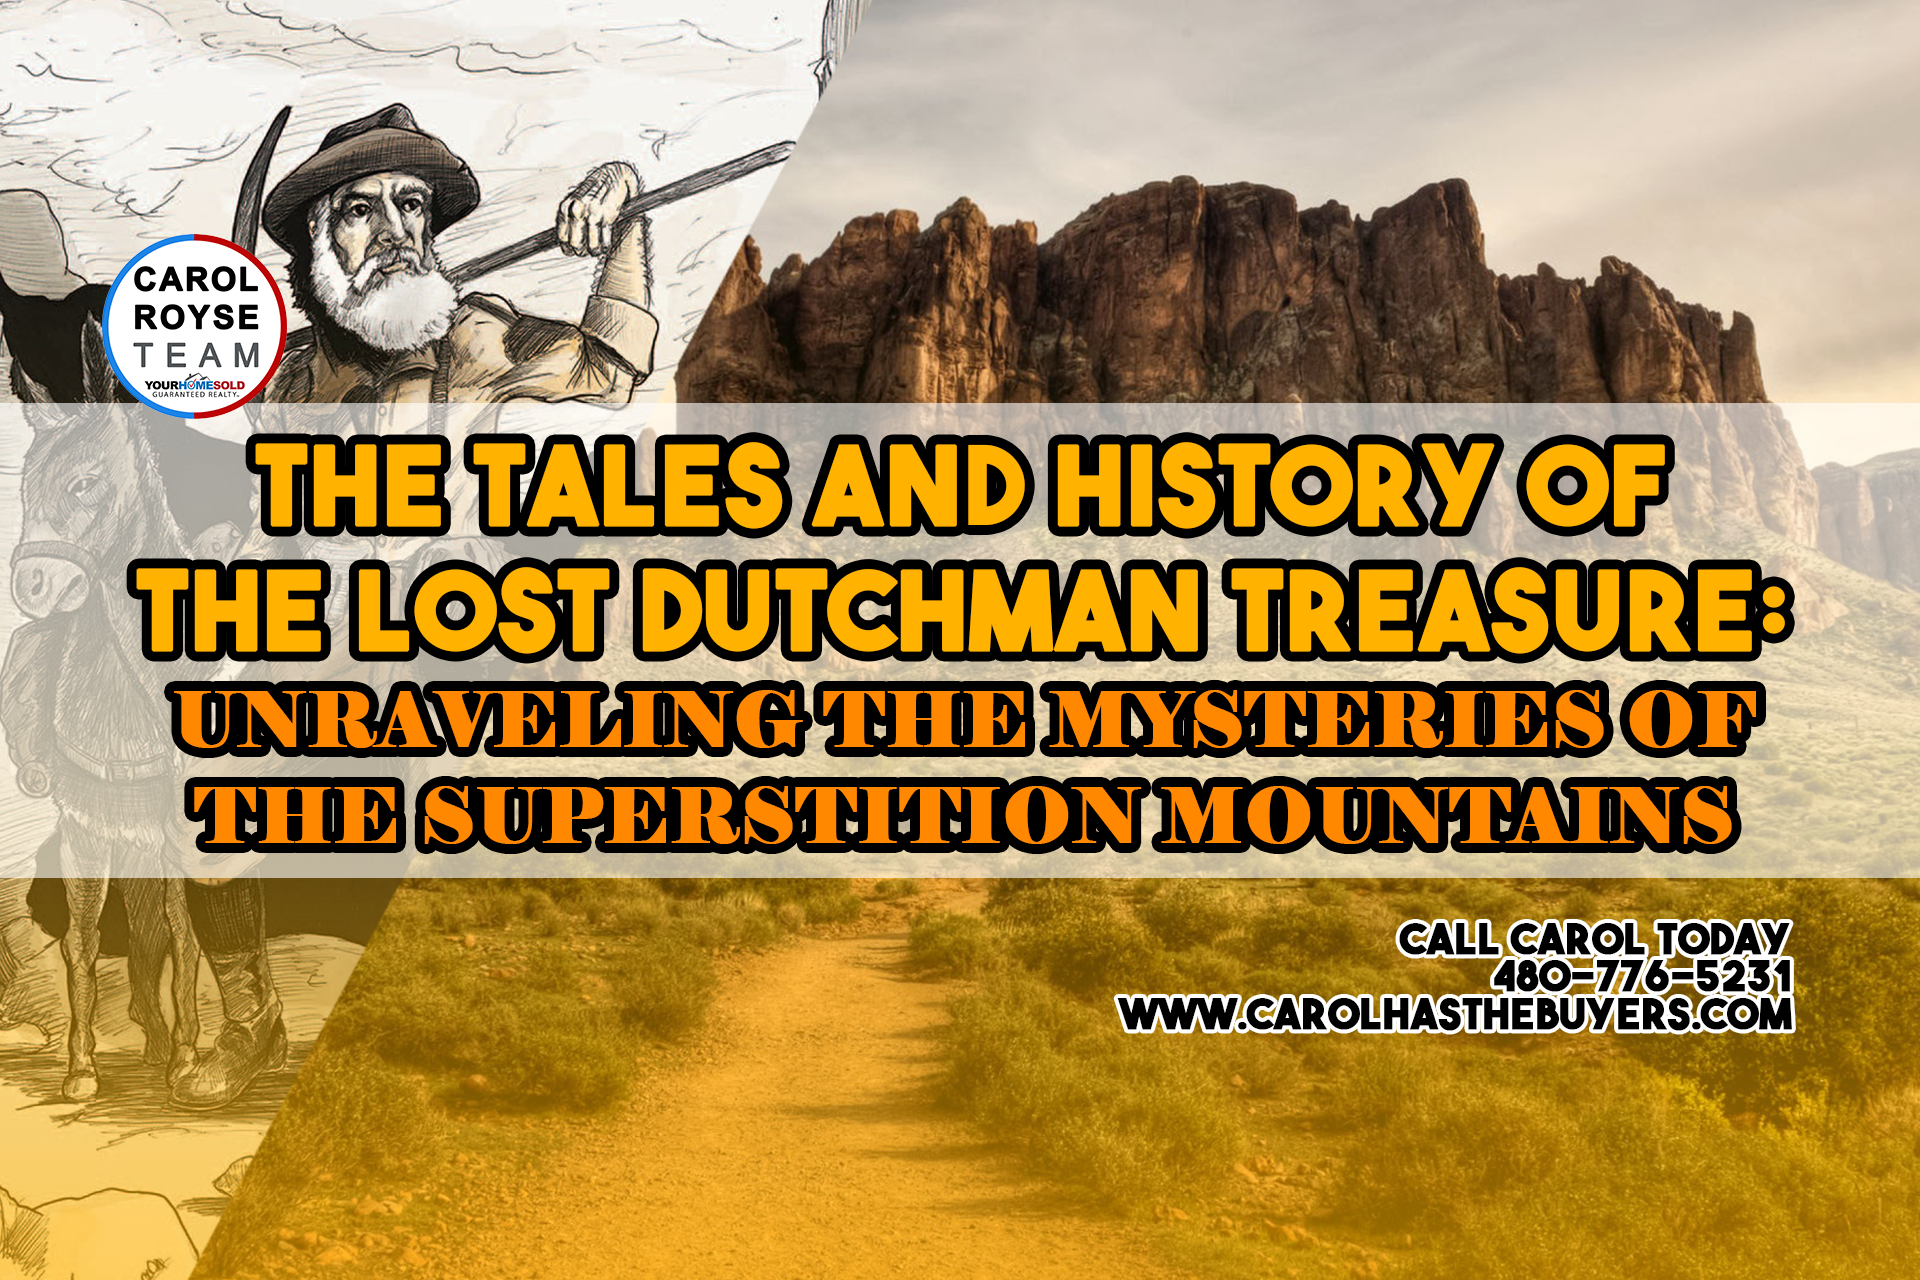 The Tales and History of the Lost Dutchman Treasure: Unraveling the Mysteries of the Superstition Mountains